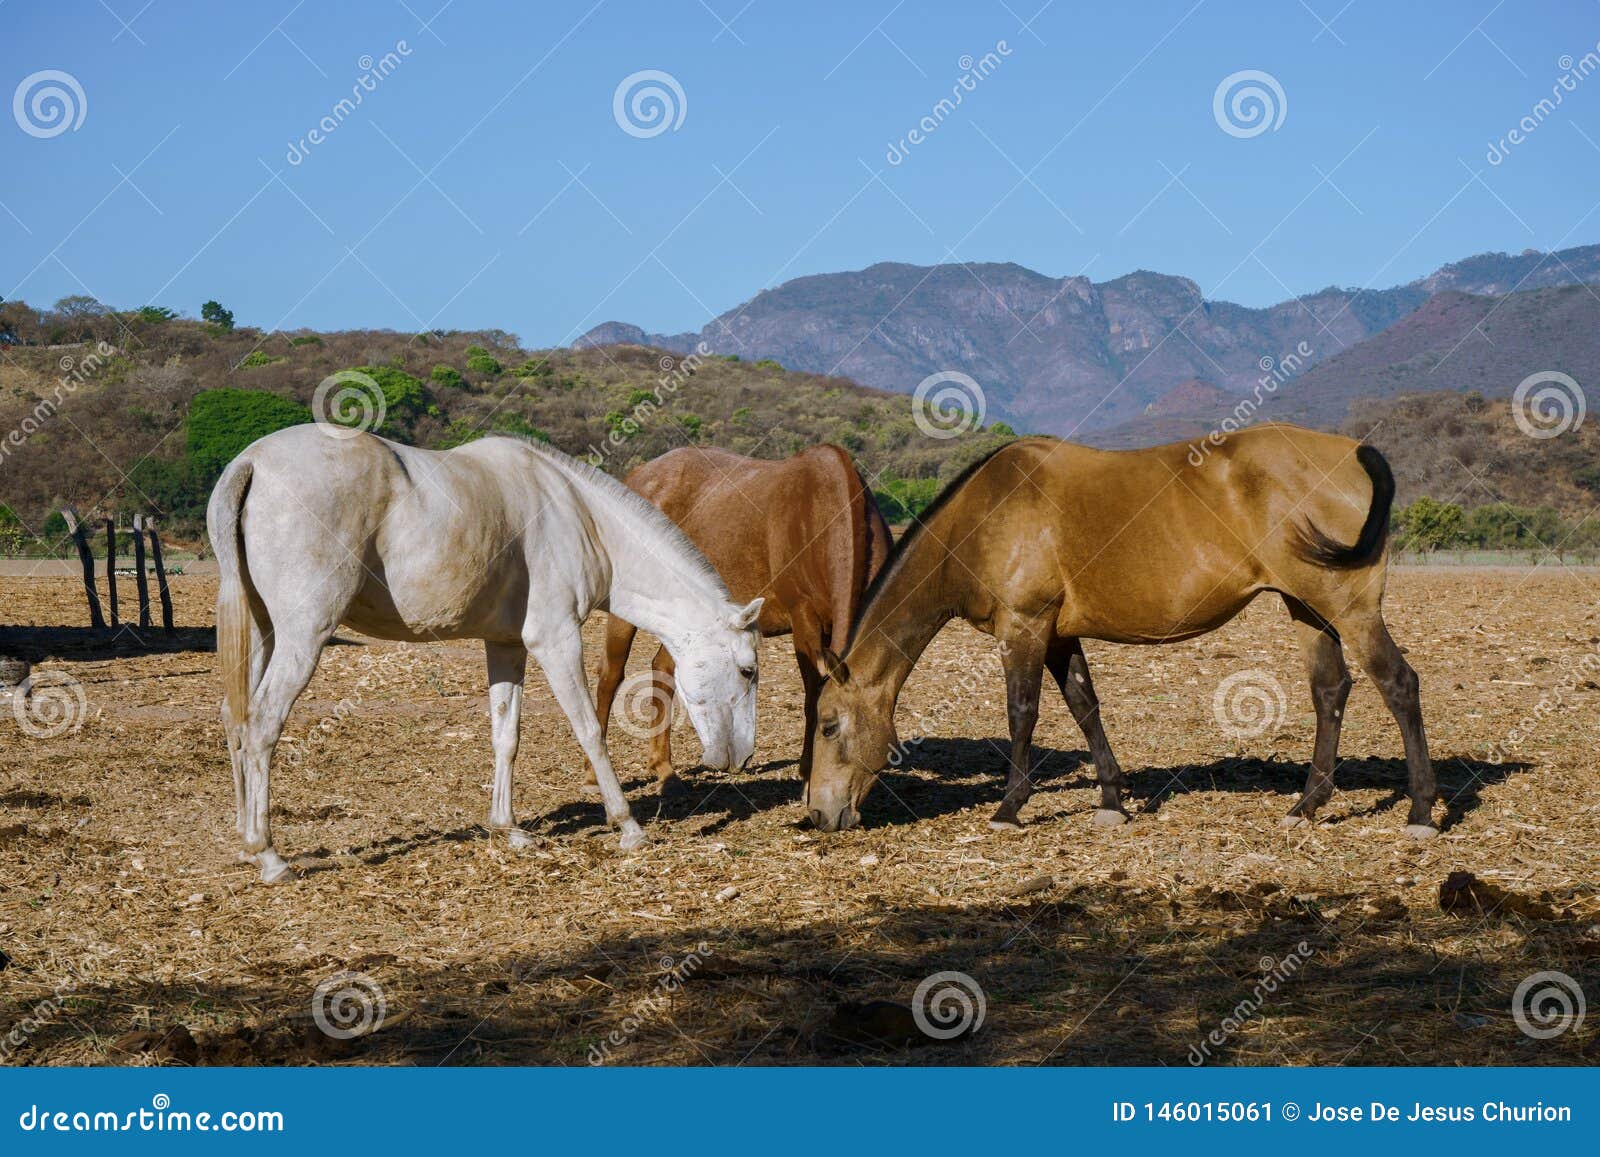 the horses are feeding in the field of mascota jalisco mexico.